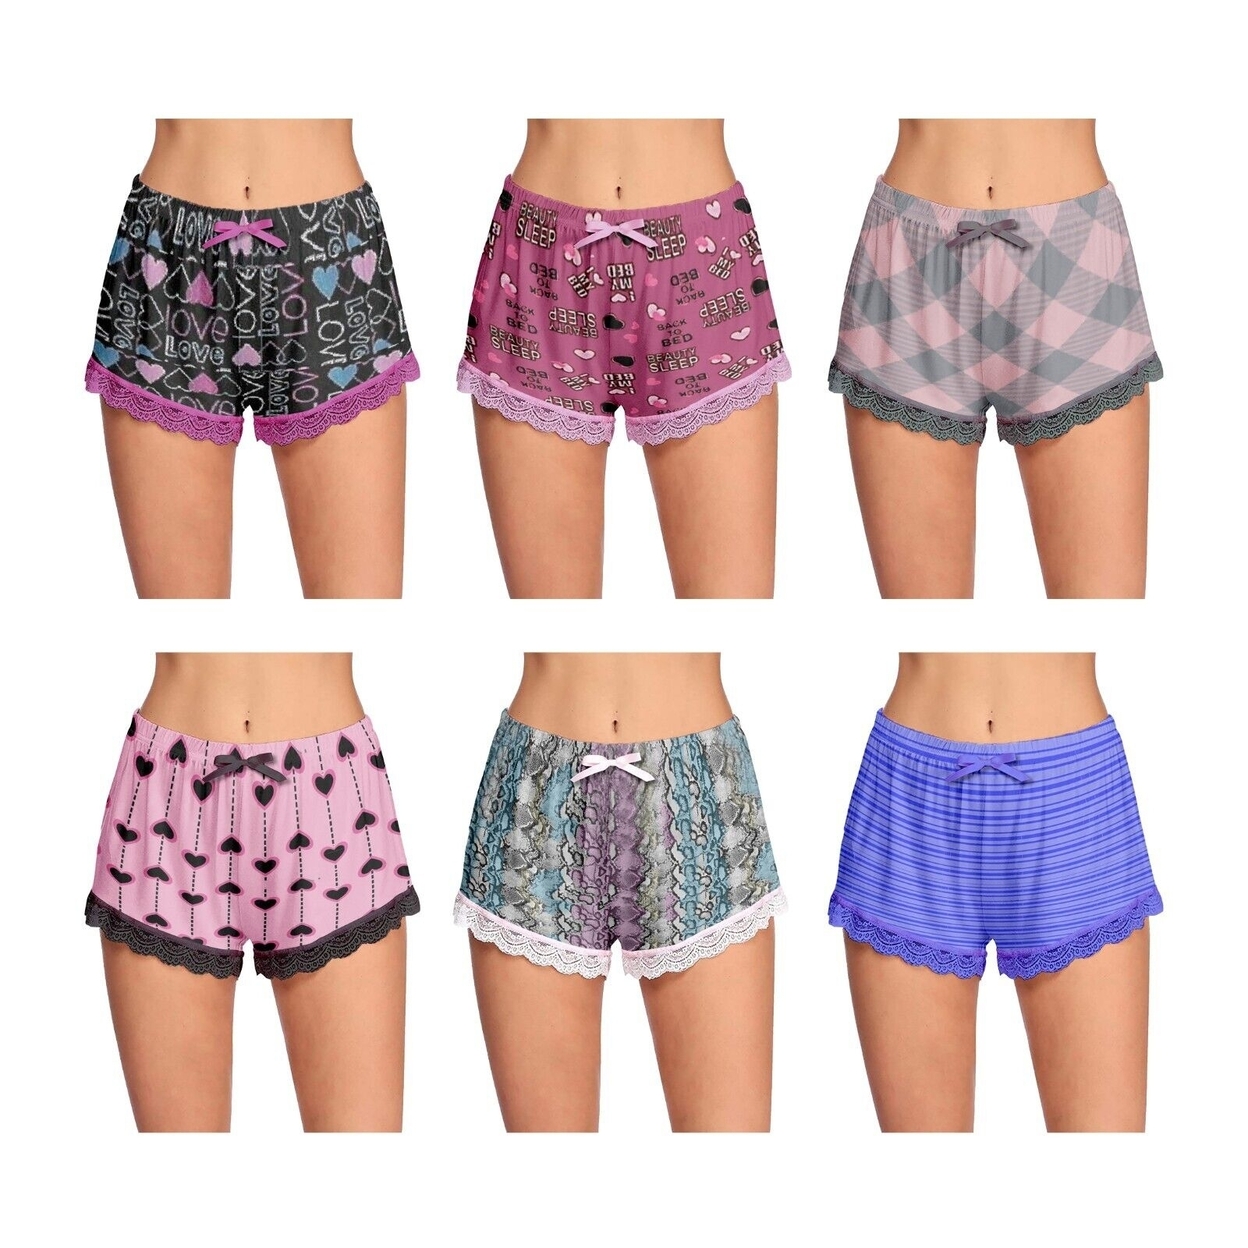 4-Pack: Women's Ultra-Soft Cozy Fun Printed Lace Trim Pajama Lounge Shorts - Small, Love